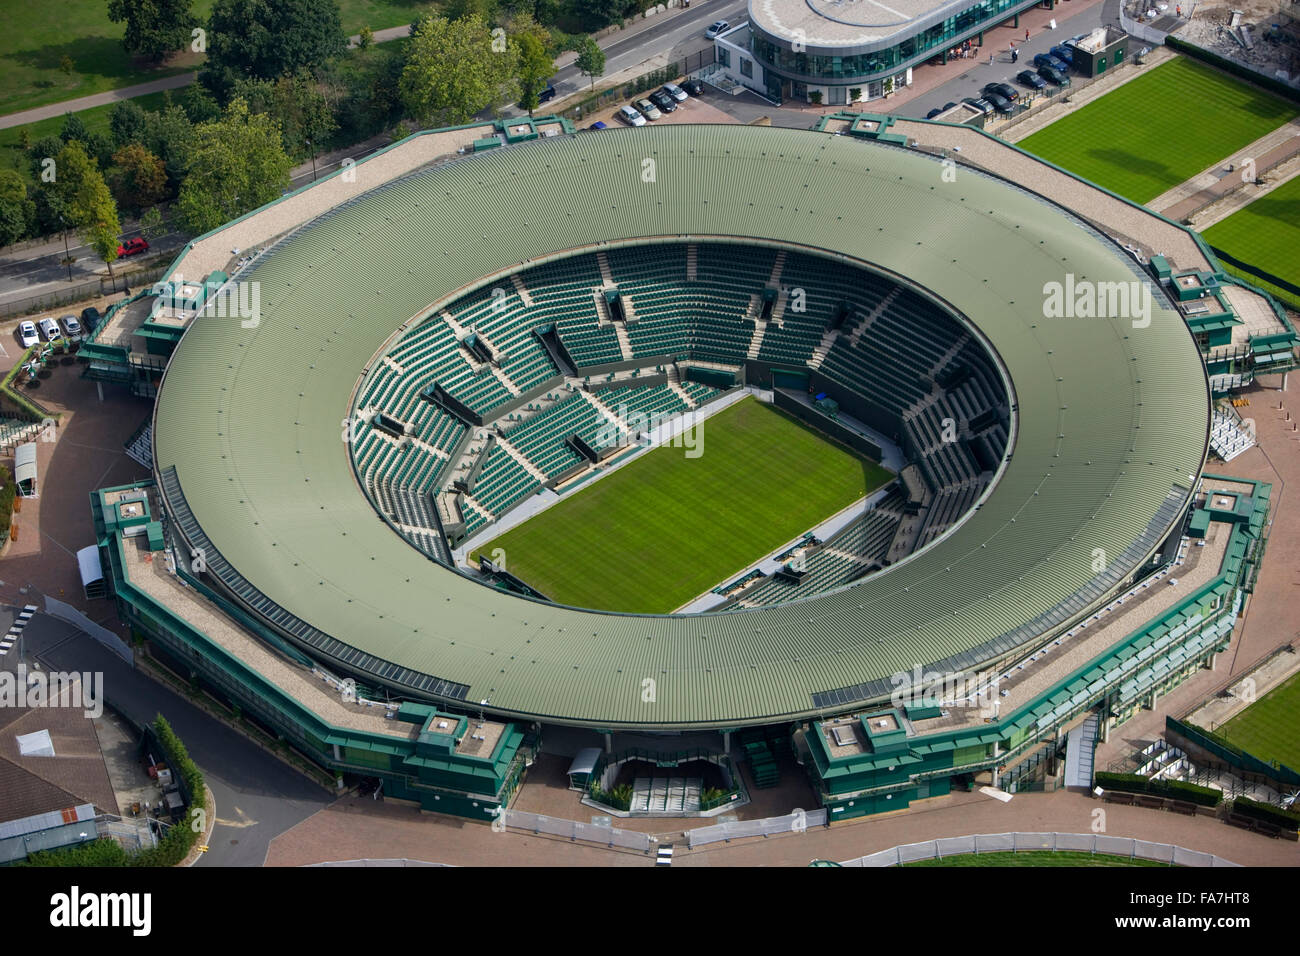 No.1 COURT, All England Lawn Tennis and Croquet Club, Wimbledon, London.  Opened in 1997, No. 1 Court is the next most prestigious tennis court at  Wimbledon after Centre Court, with a capacity